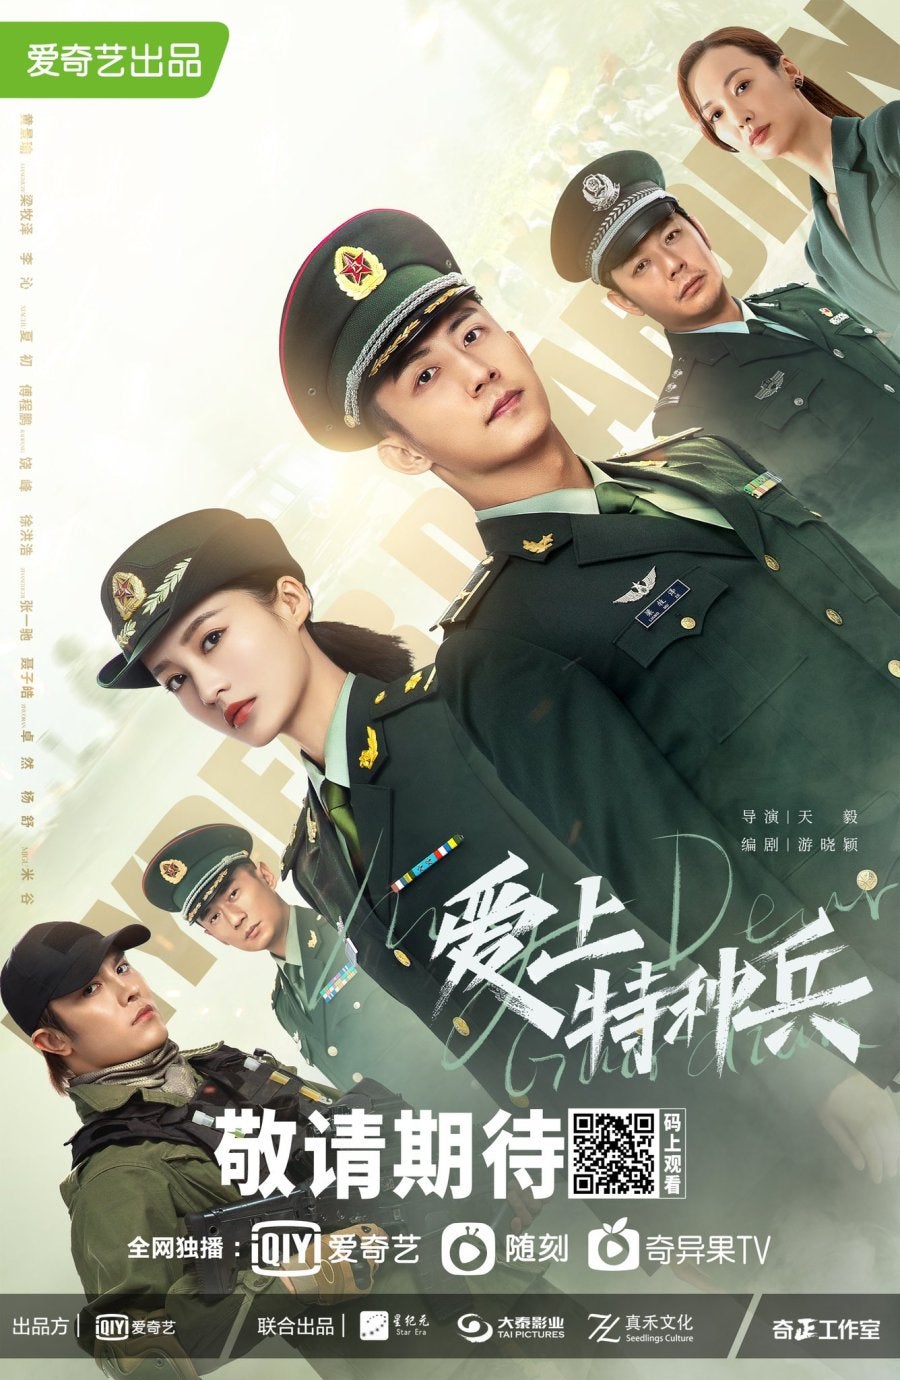 TV ratings for My Dear Guardian (亲爱的戎装) in Ireland. iqiyi TV series